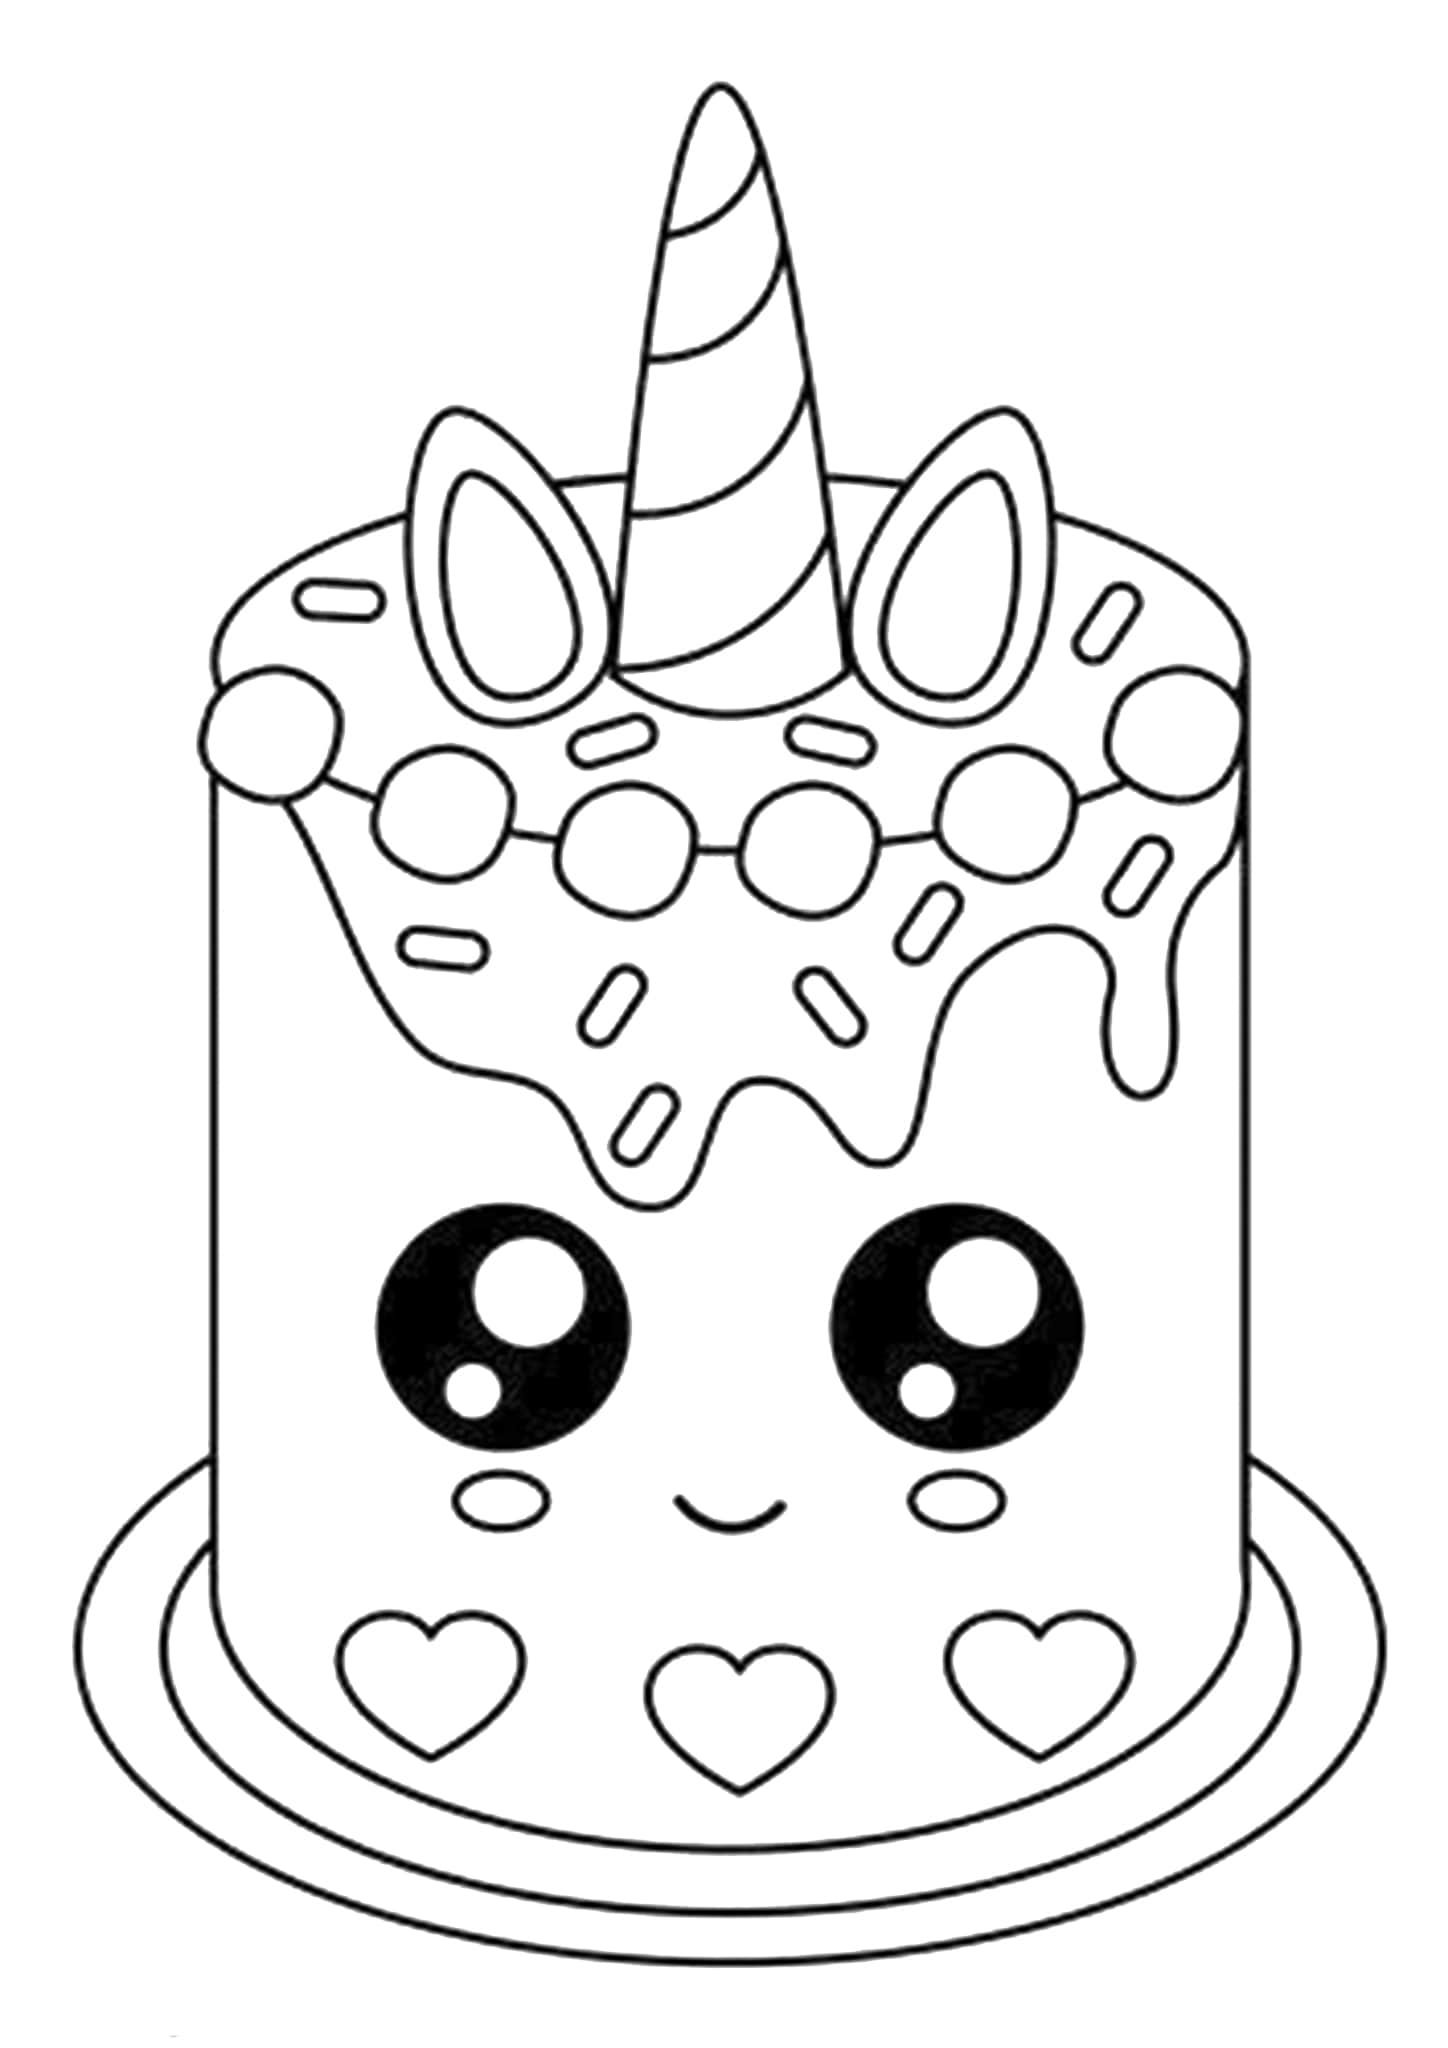 Free & Easy To Print Cake Coloring Pages | Cupcake coloring pages, Unicorn  coloring pages, Mermaid coloring pages